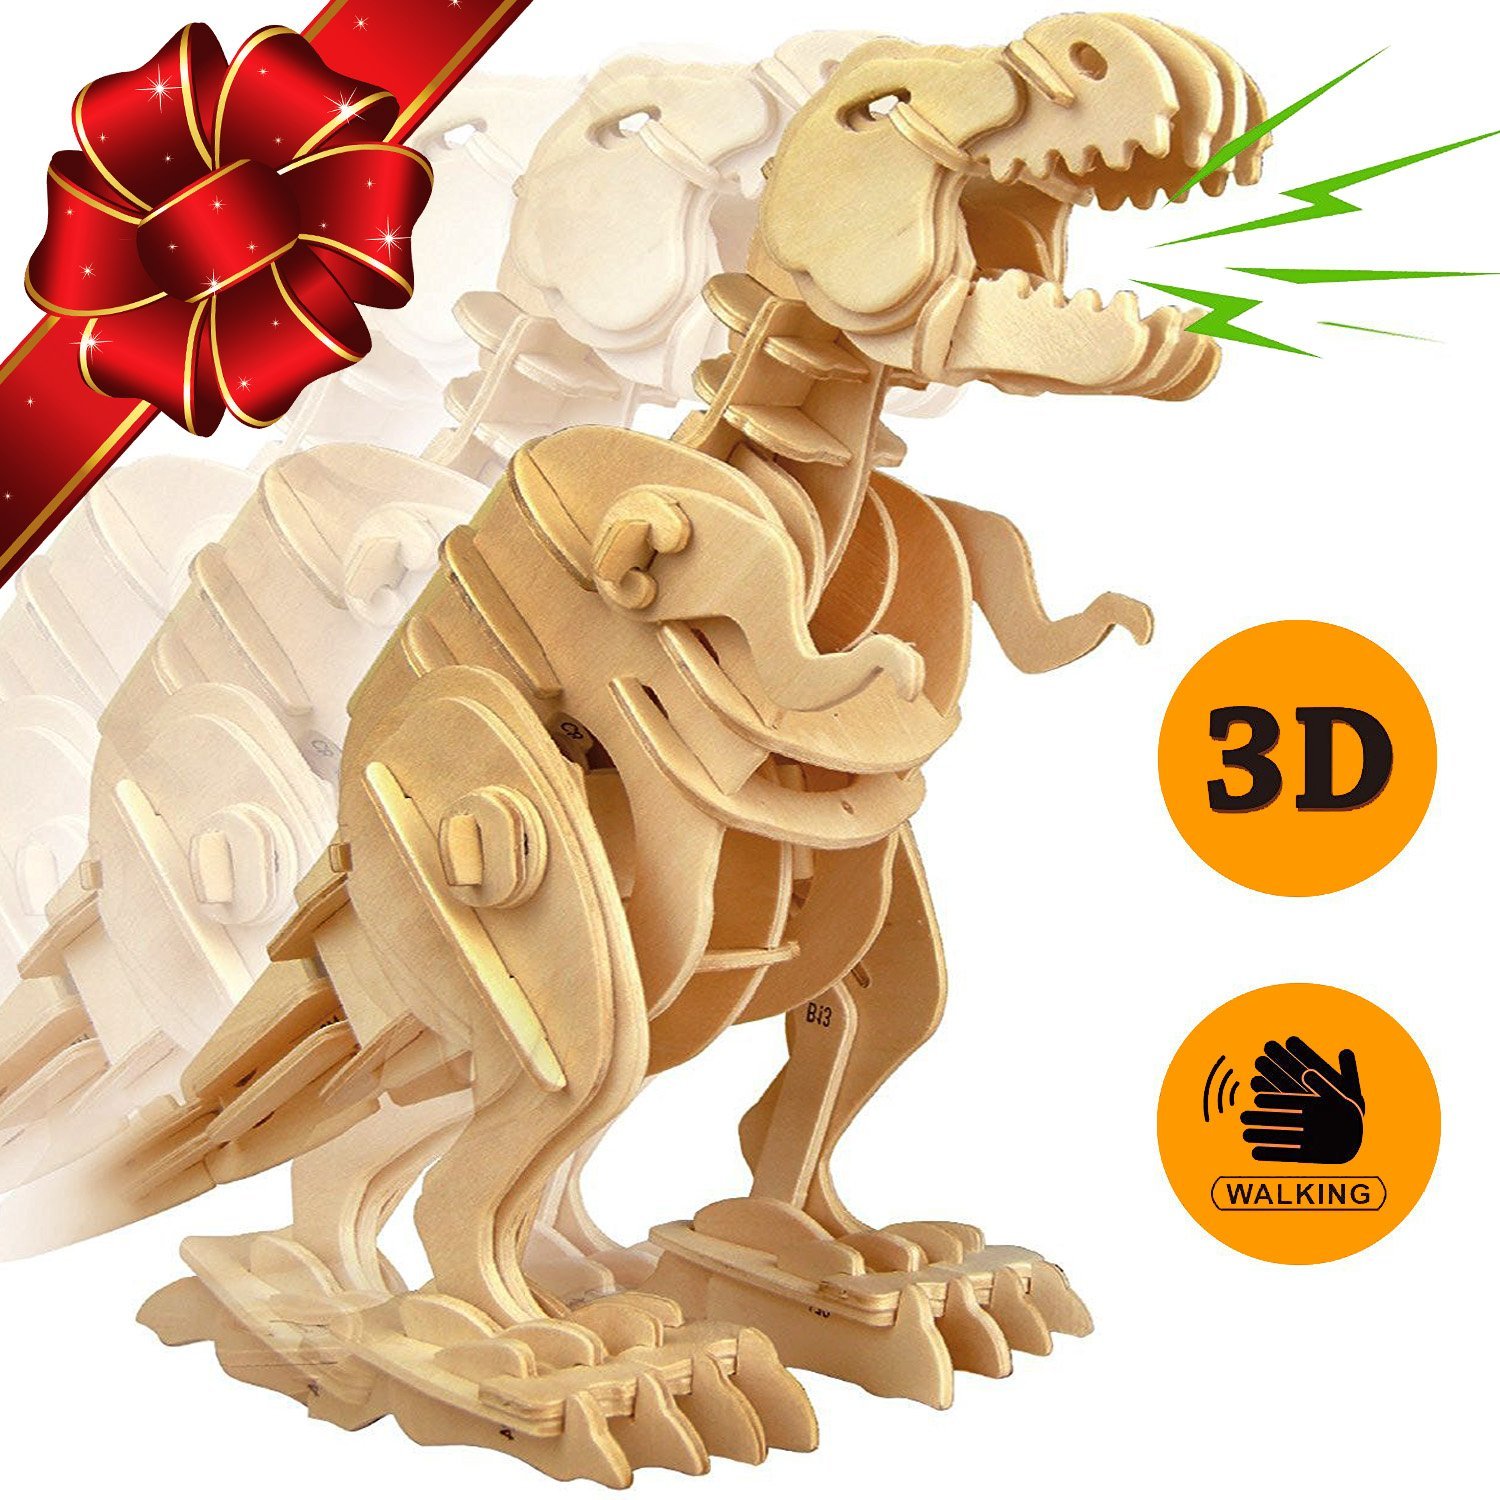 3d puzzles for 8 year olds